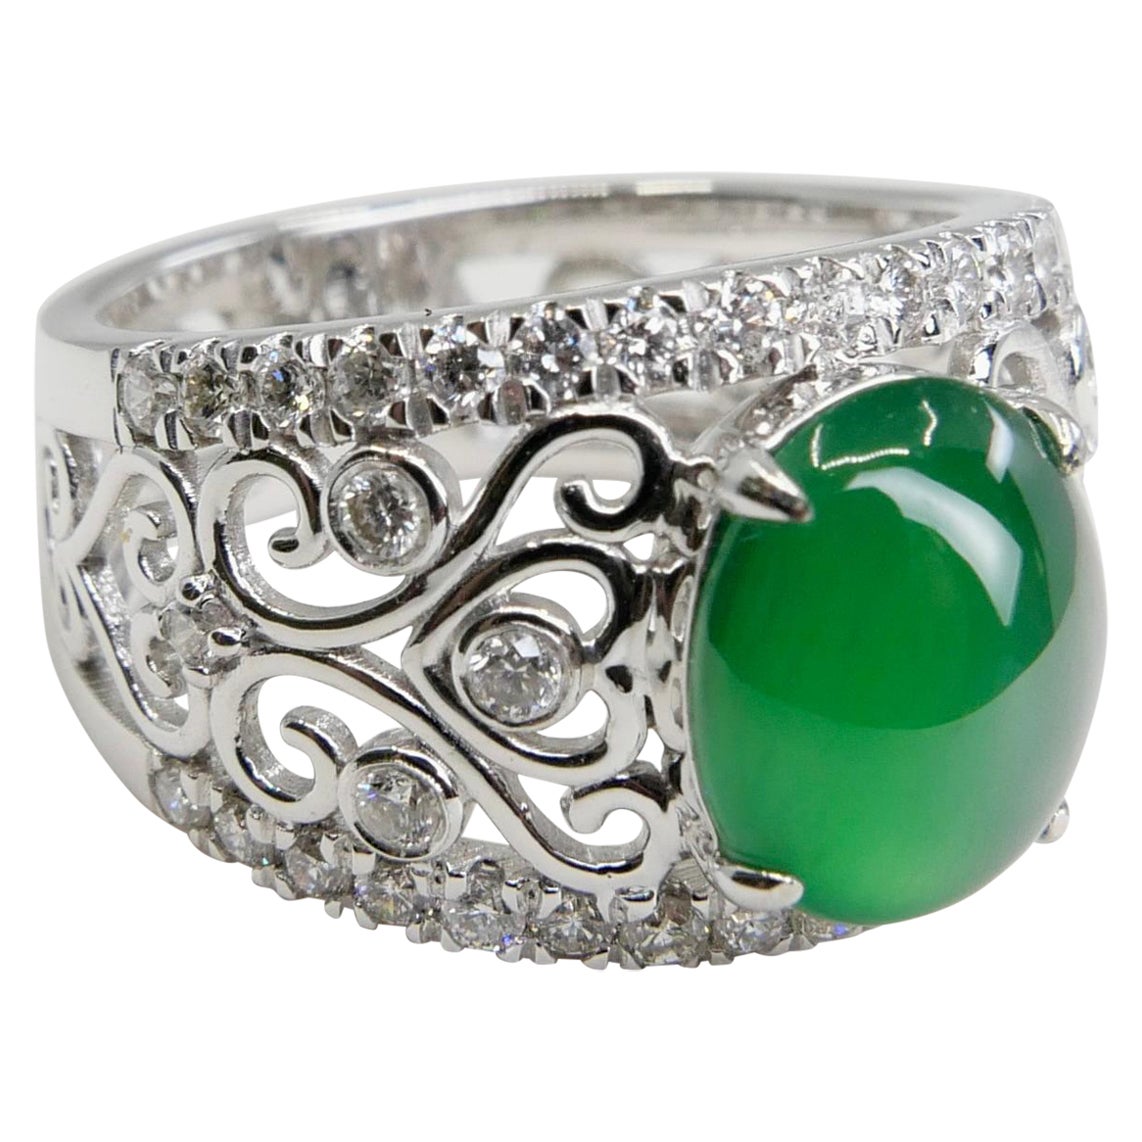 Certified Natural Jade & Diamond Cocktail Ring, Imperial Green with Super Glow!